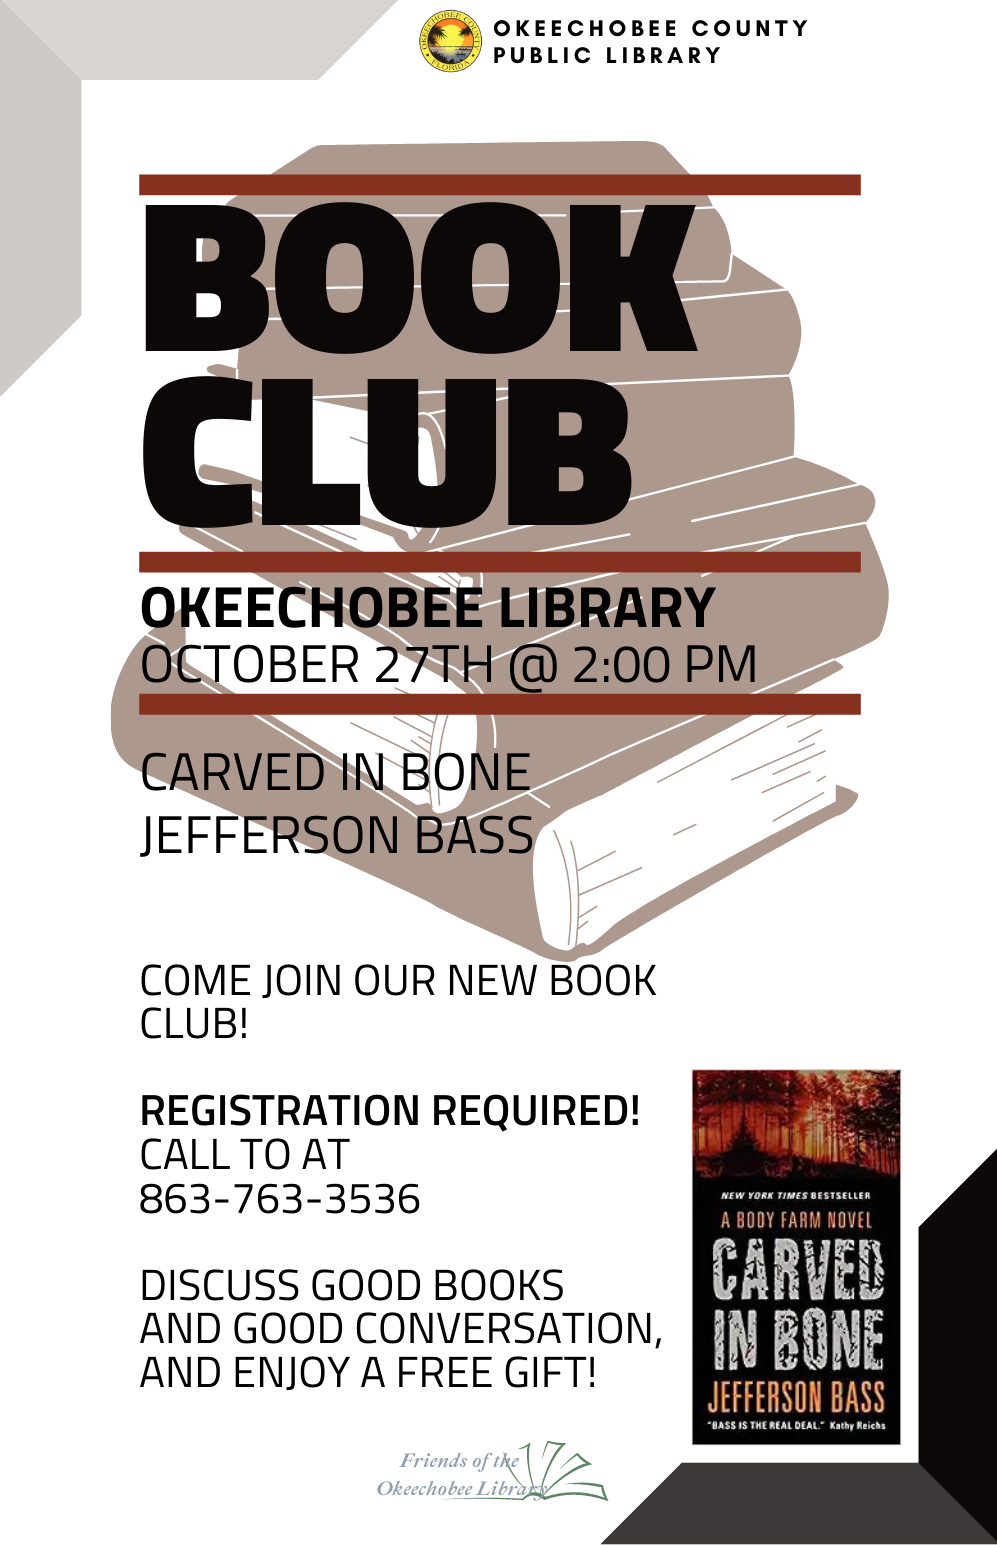 "Book Club will meet October 27th at 2:00 p.m. to discuss Carved In Bone by Jefferson Bass. Join us to discuss our latest read and receive a small gift bag!"